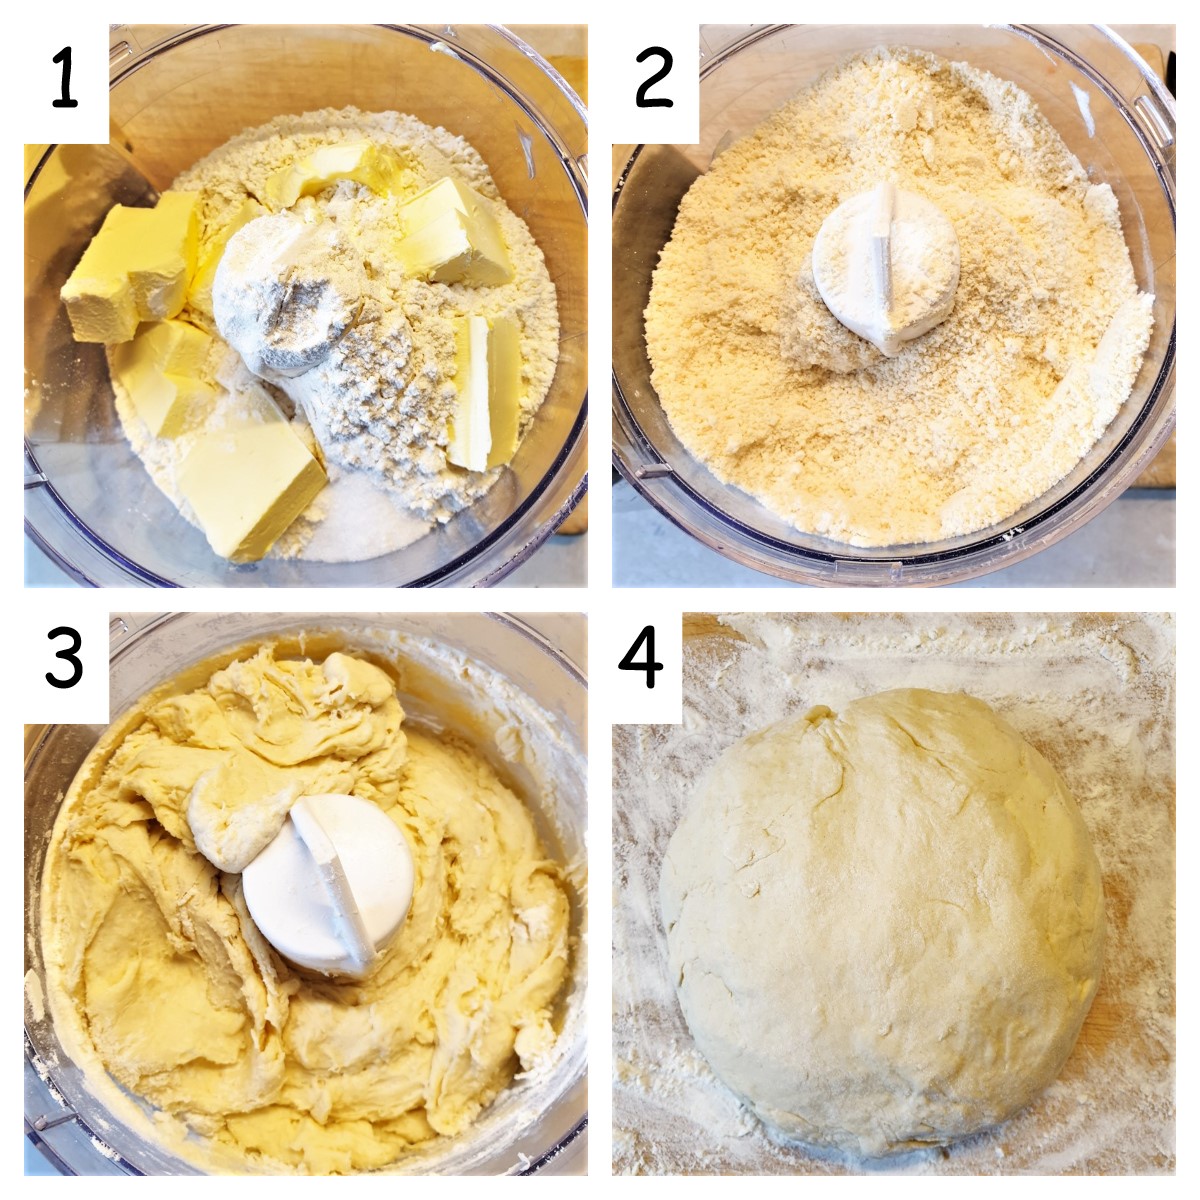 Collage of 4 images showing steps for making pasty.